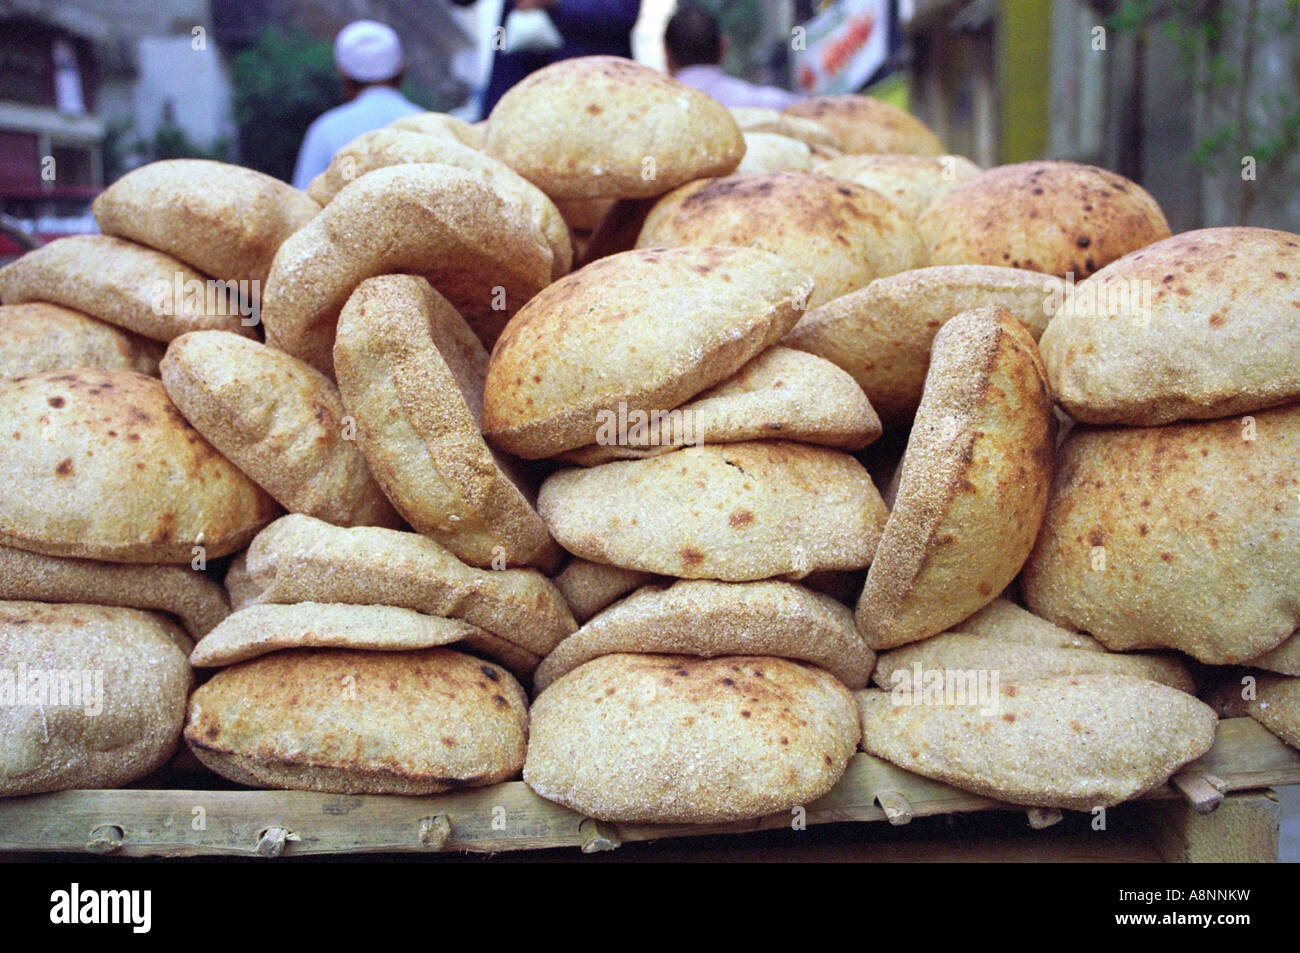 Bread Baking Egypt High Resolution Stock Photography and Images - Alamy